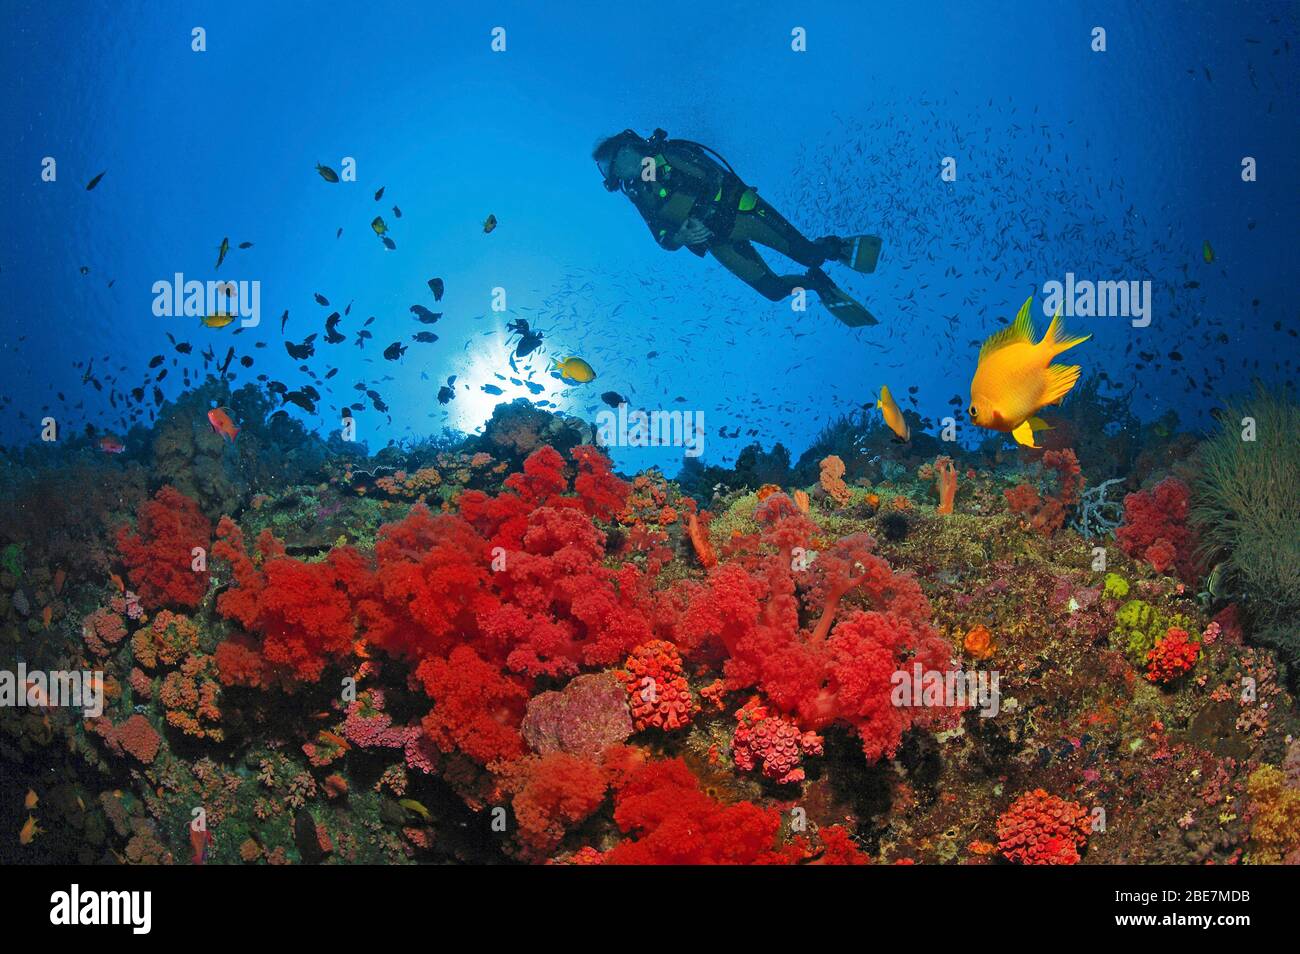 Scuba diver in a colourful coral reef with red soft corals (Dendonephthya sp.), Moalboal, Cebu, Visayas, Philippines Stock Photo